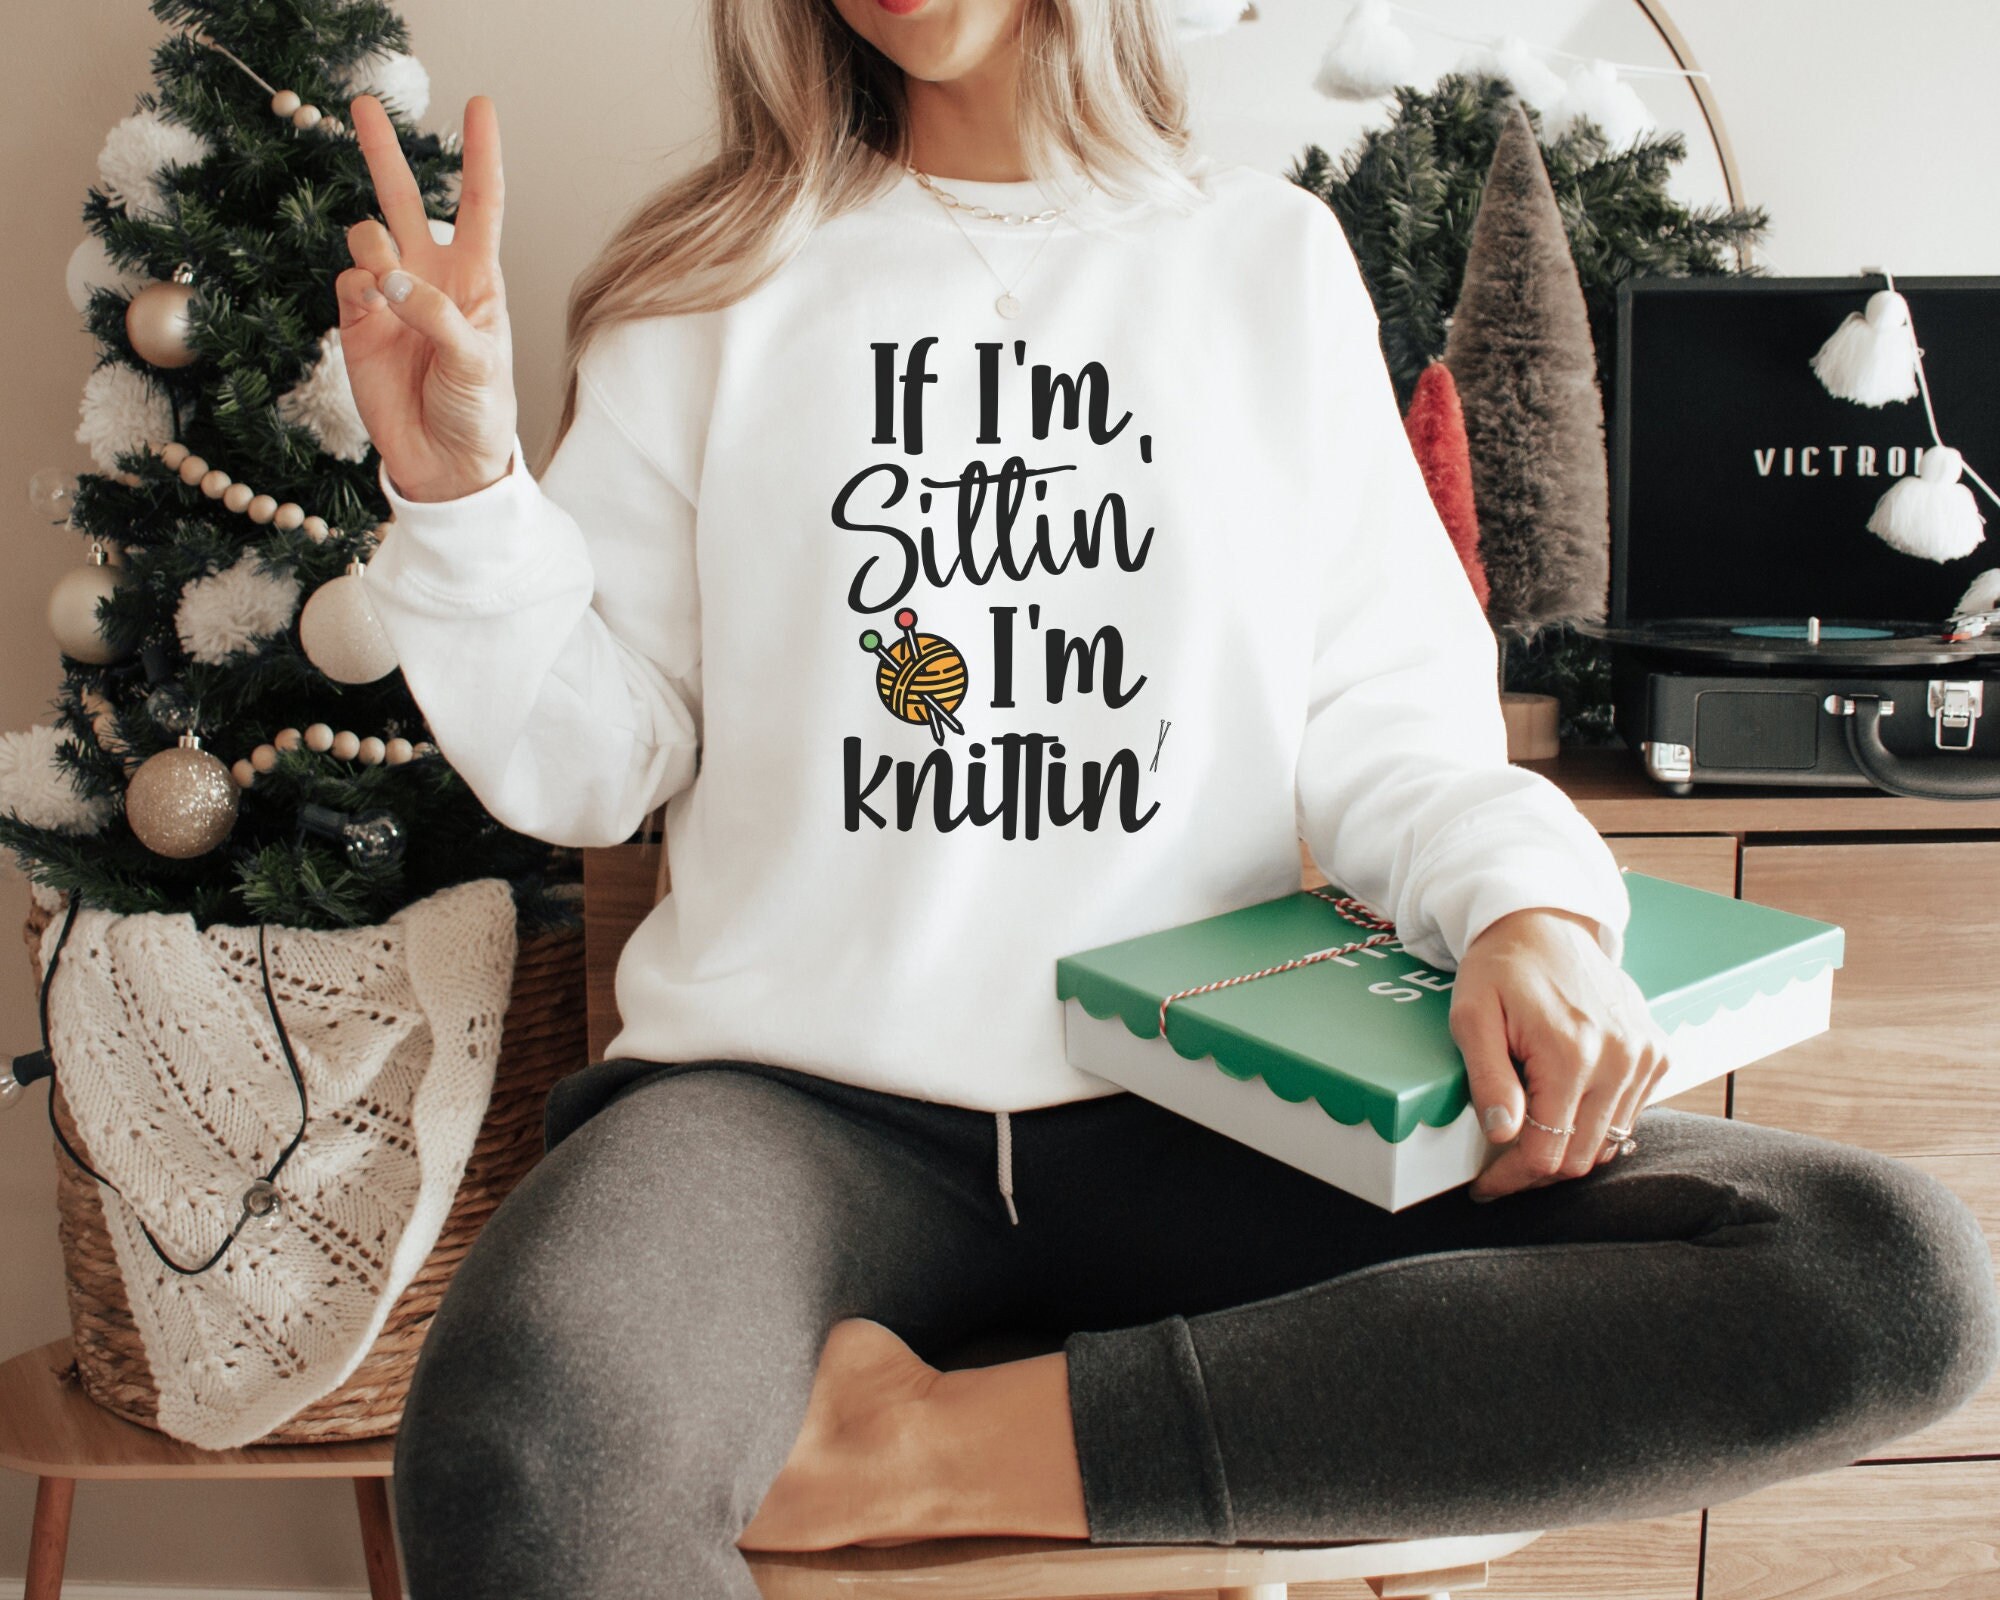 The 15 best gifts for knitters - Unique ideas for Christmas, Birthdays, etc